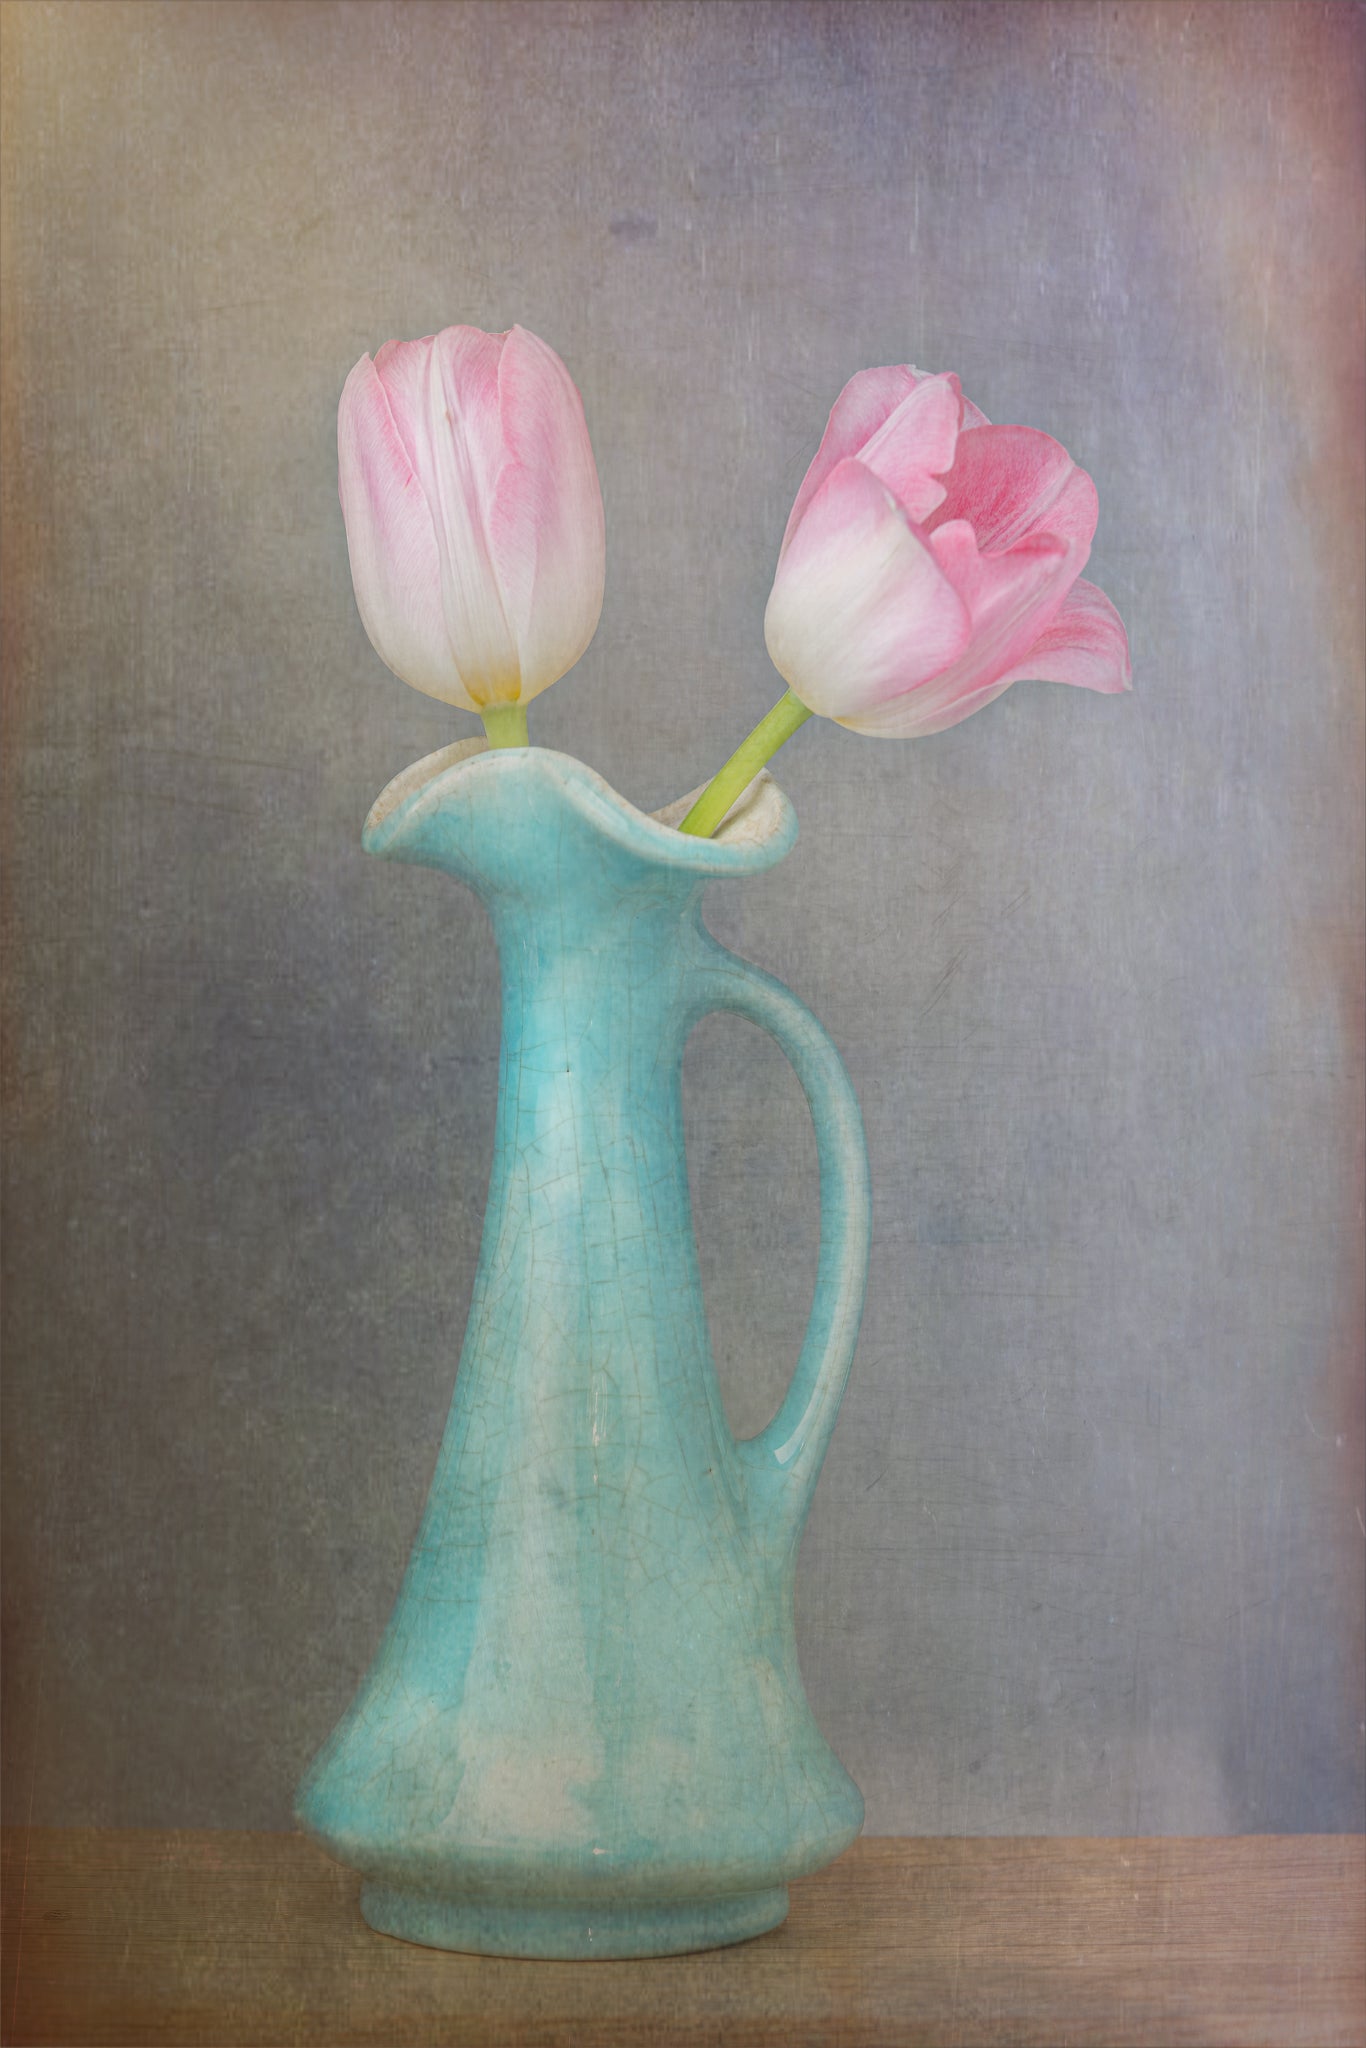 Fine art flower photograph of two pink tulips in a vase titled "An Ambitious Pair" by Cameron Dreaux of Dreaux Fine Art.